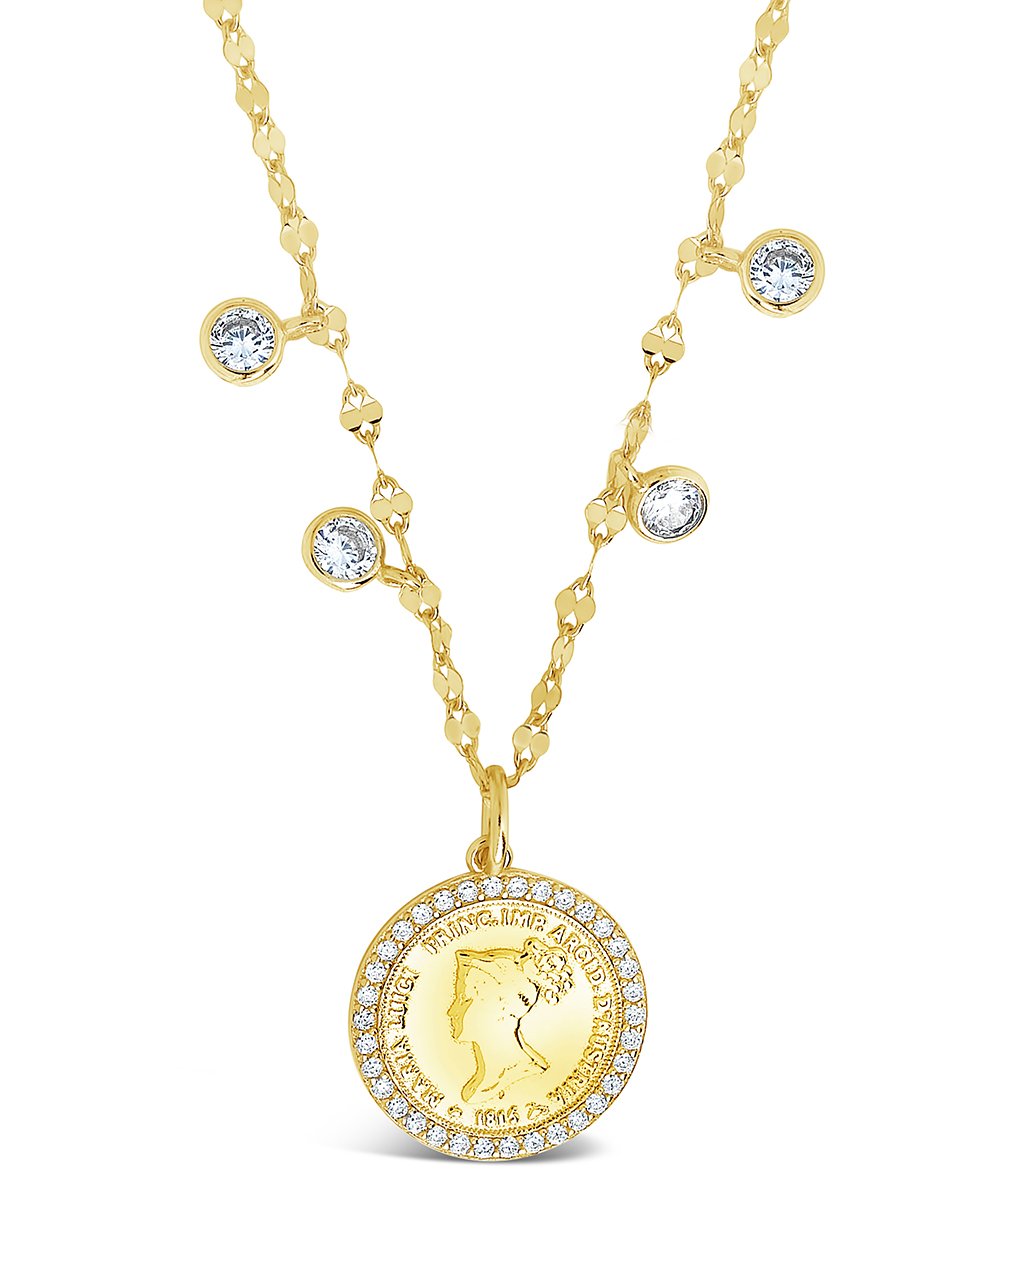 Sterling Silver Coin Medallion & Bezel CZ Charm Necklace Necklace Sterling Forever Gold 